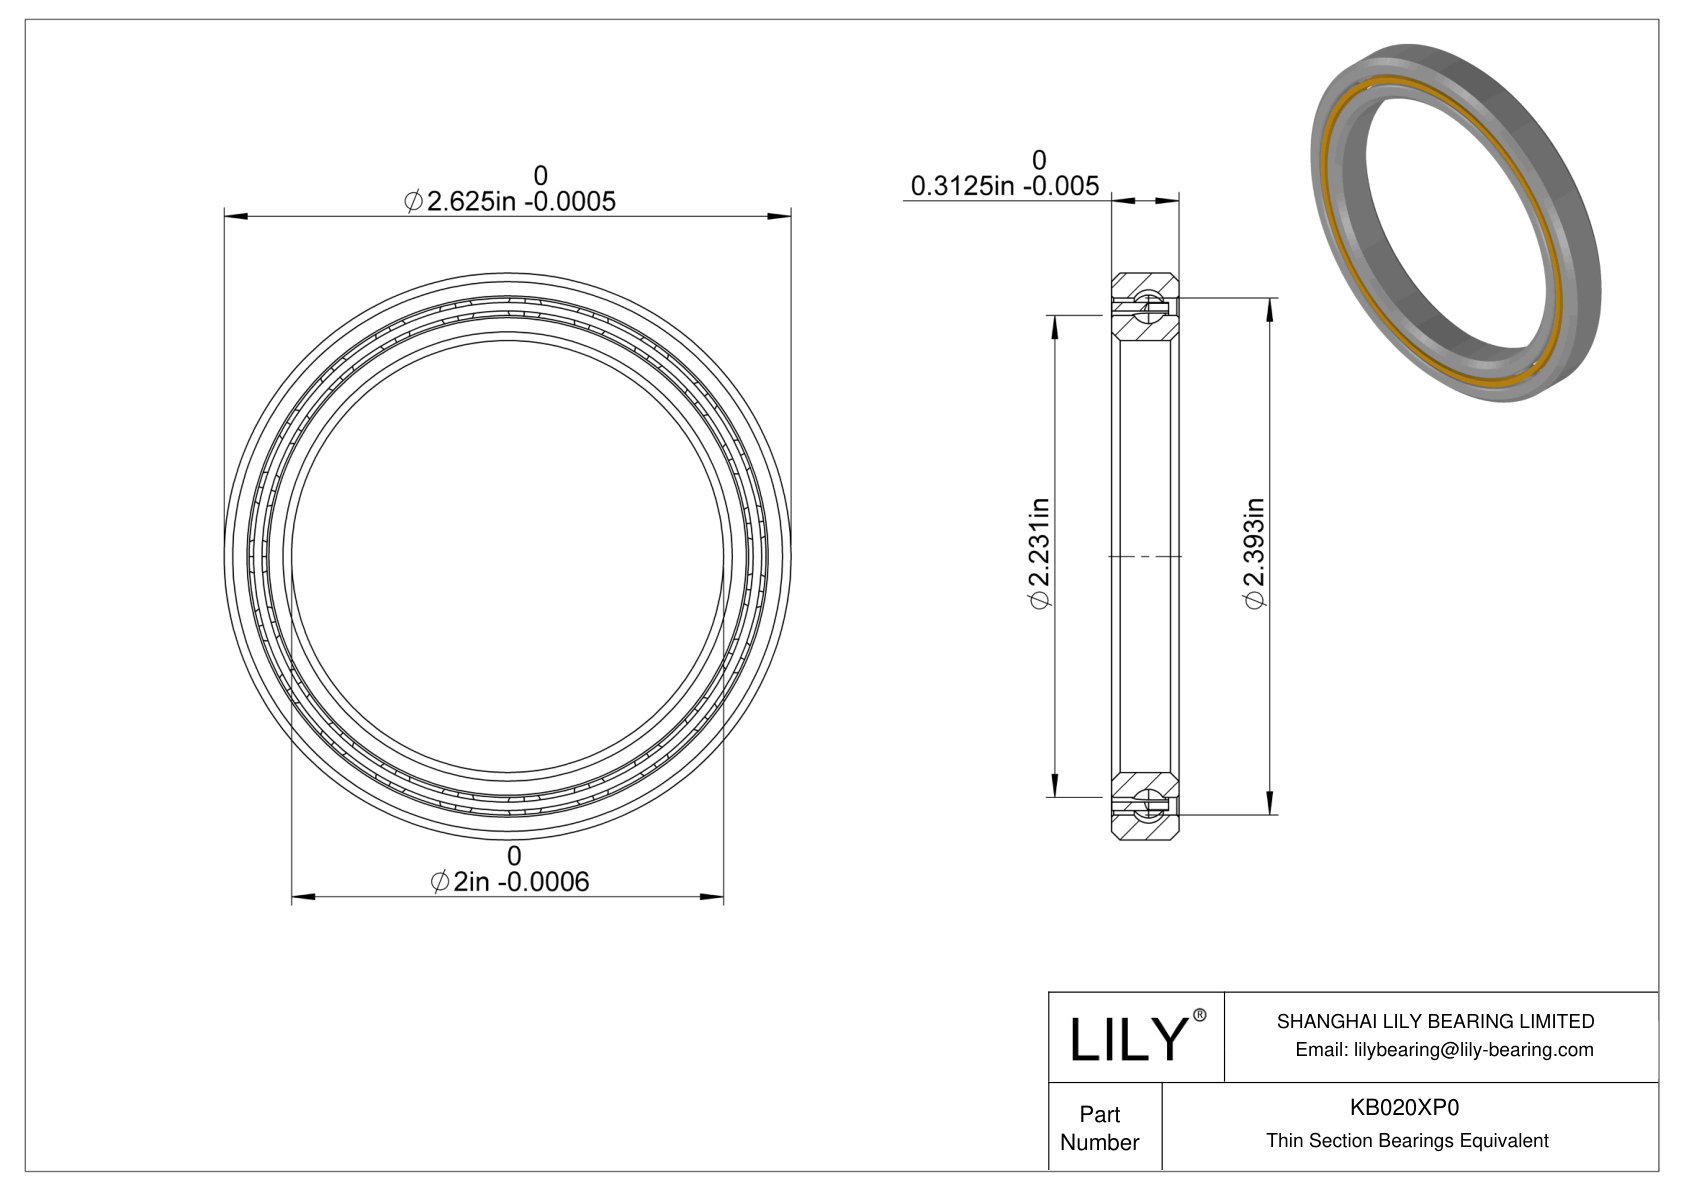 KB020XP0 Constant Section (CS) Bearings cad drawing